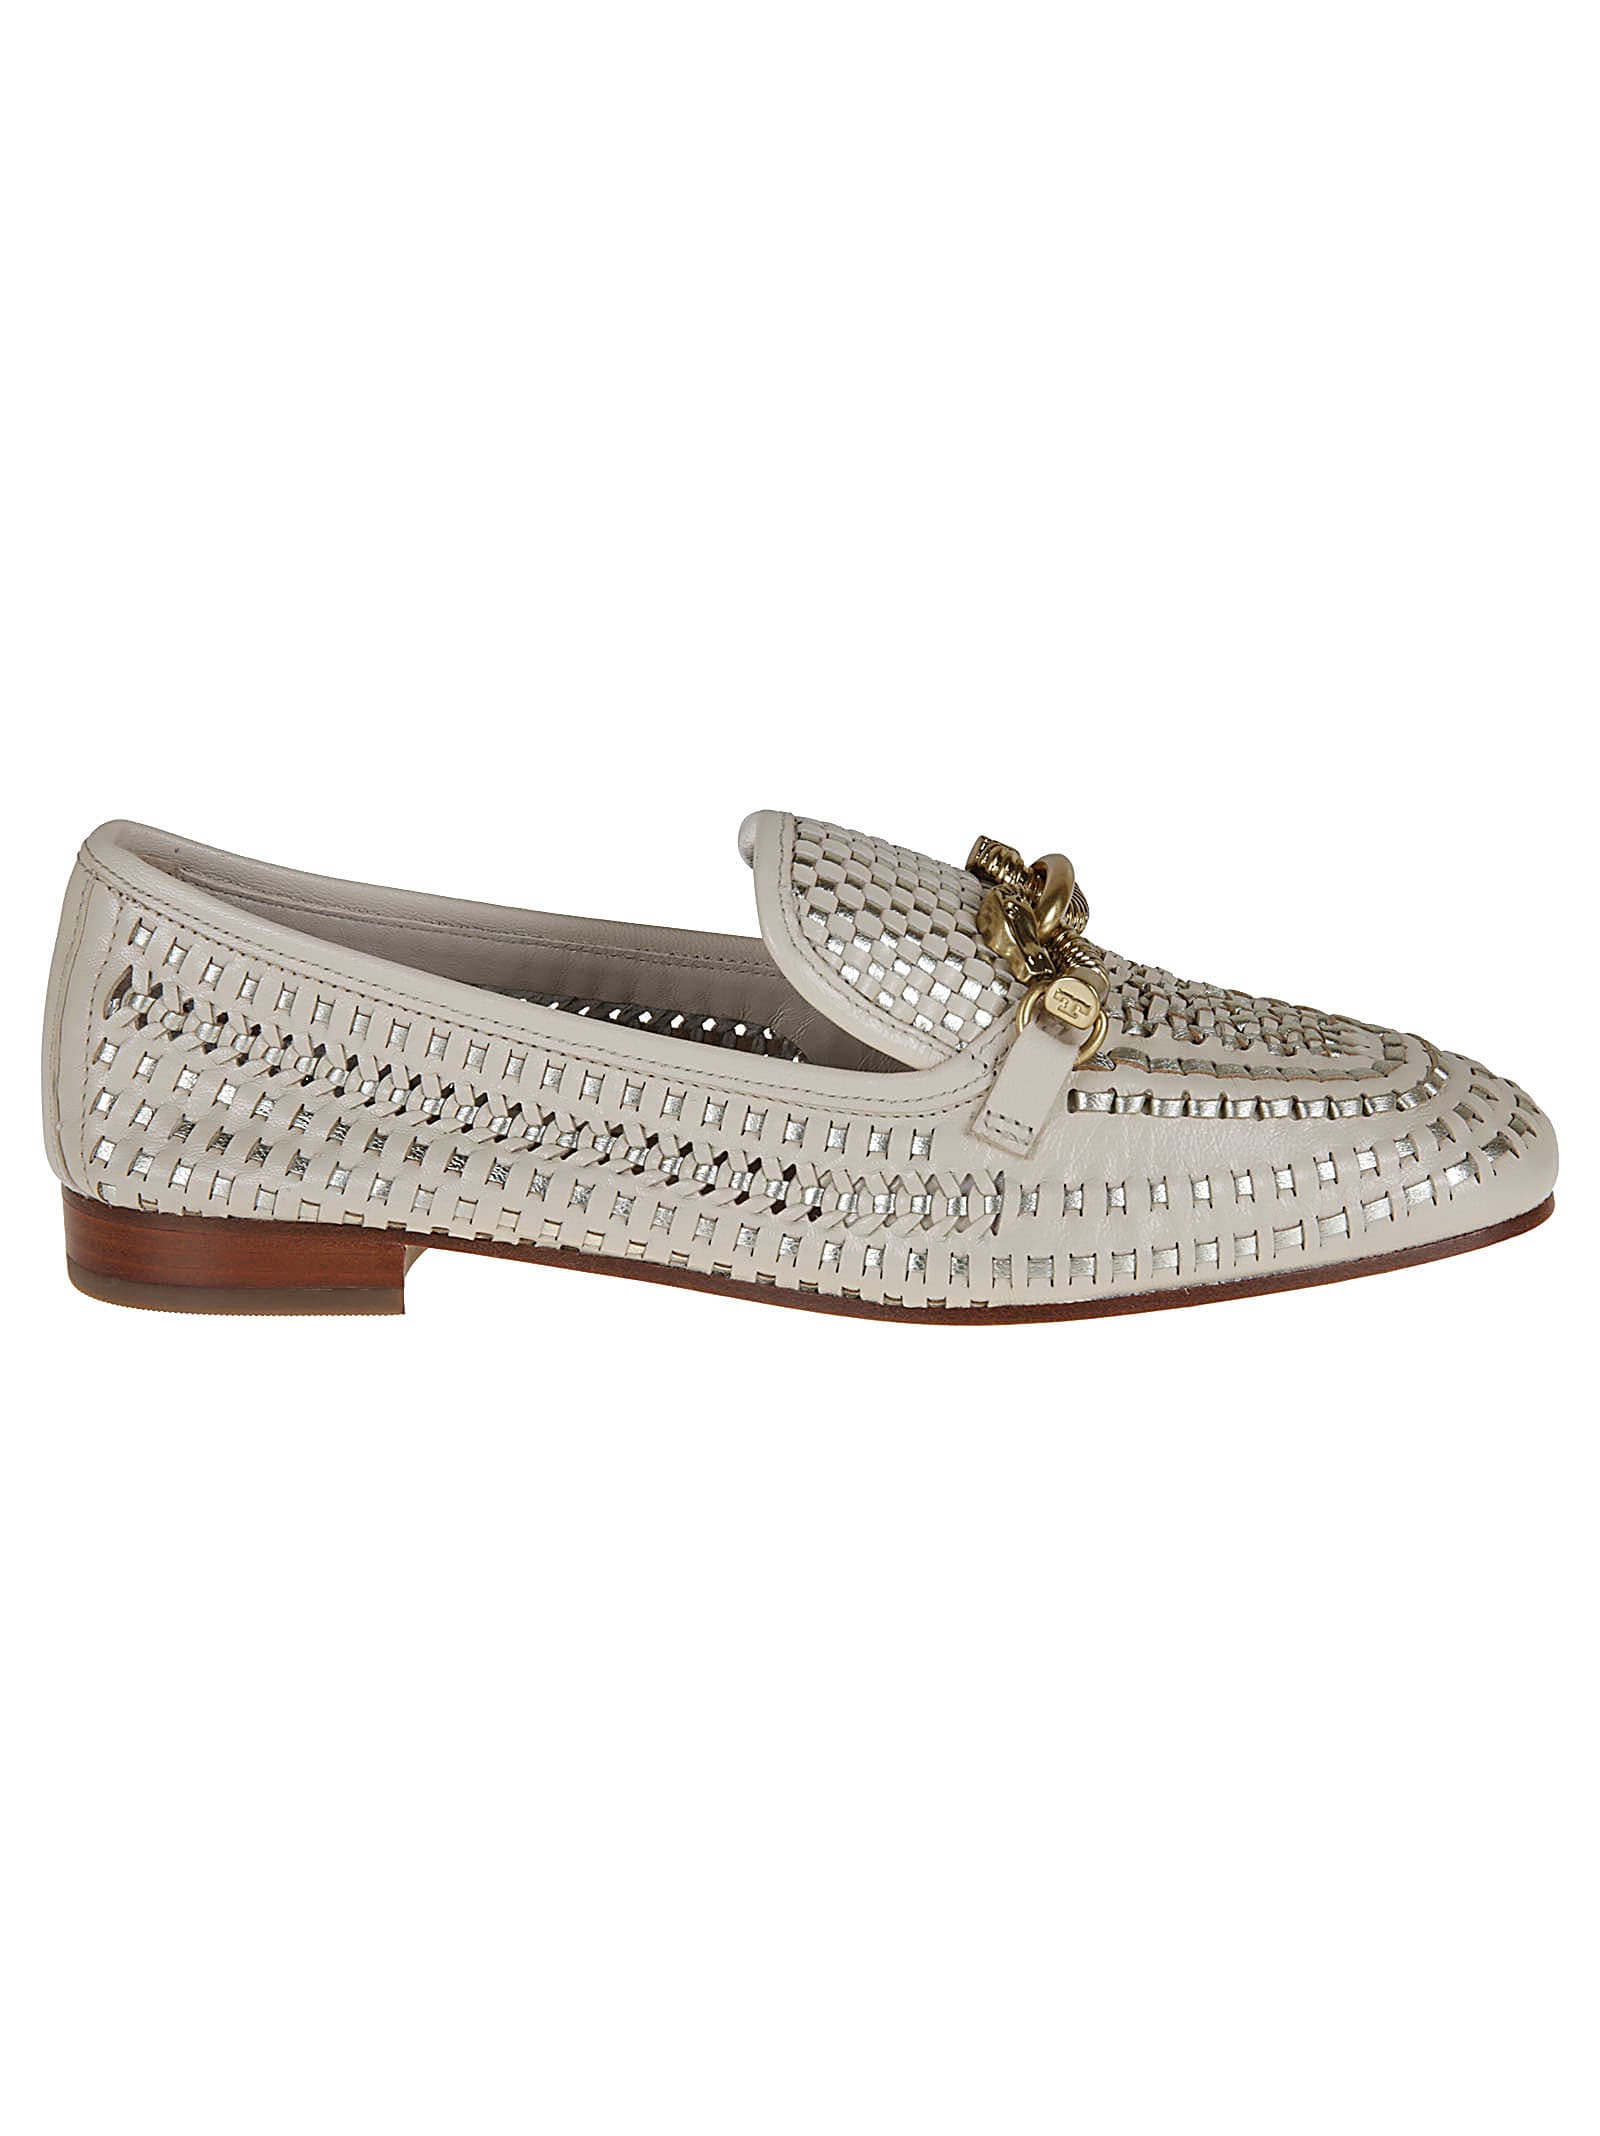 Tory Burch Jessa Woven Loafers In Brie/spark/gold | ModeSens